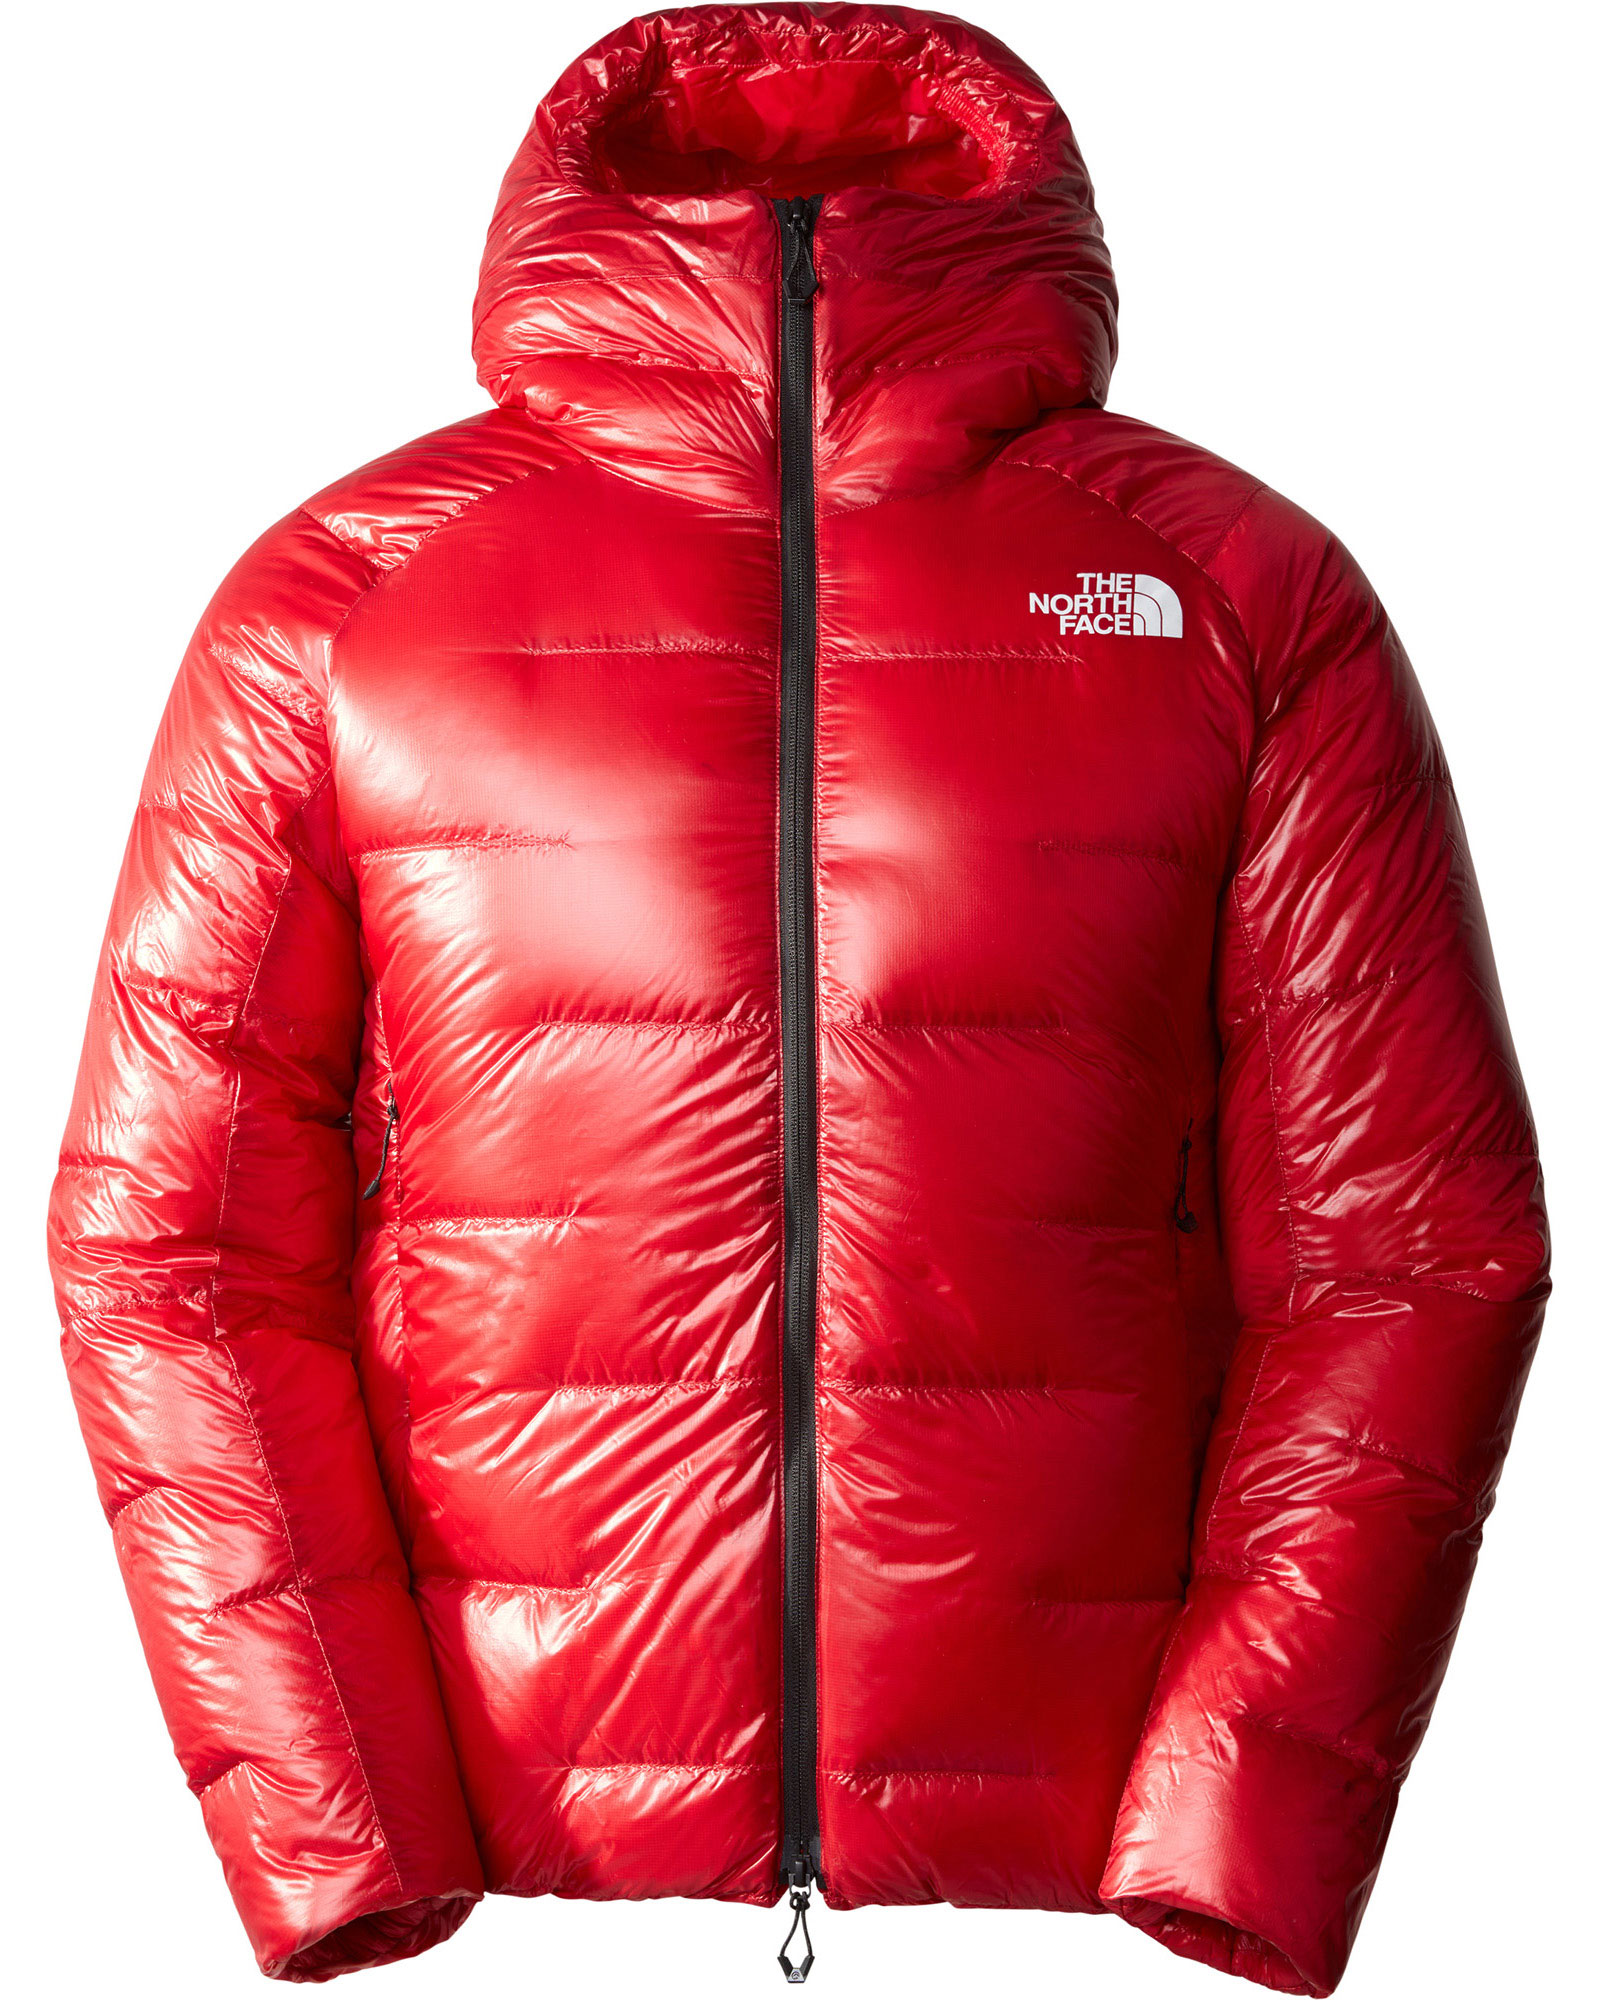 The North Face Summit Pumori Women’s Down Parka Jacket - TNF Red XS